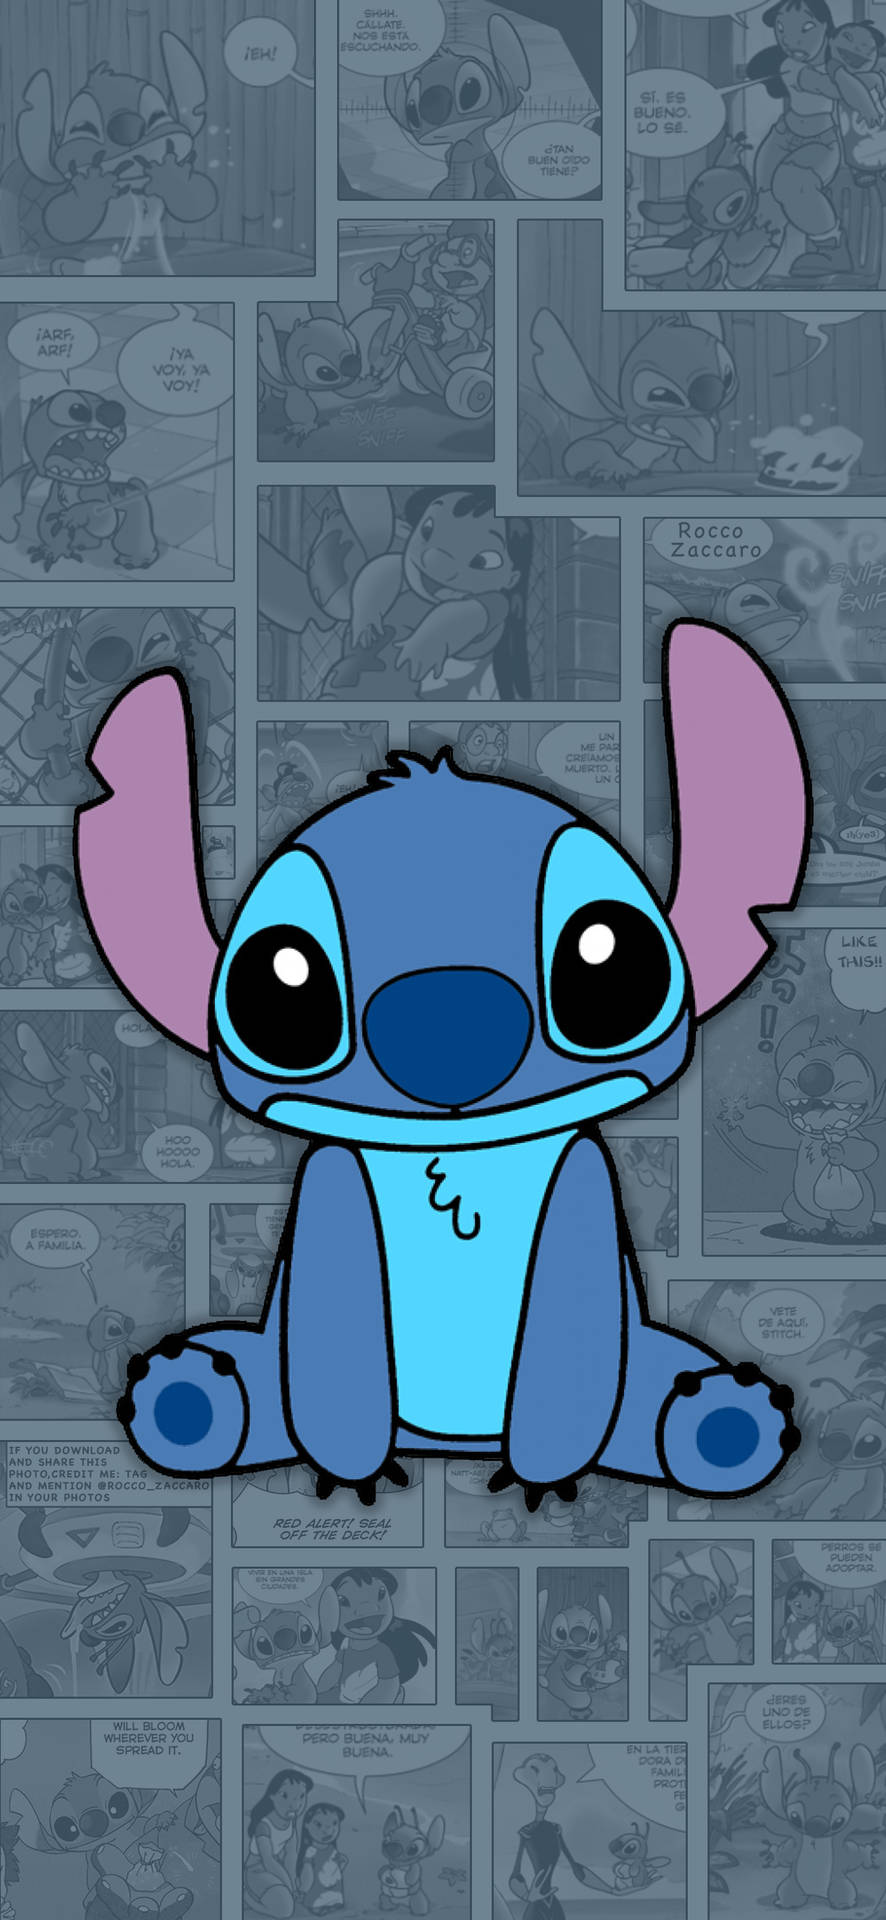 Cute Aesthetic Stitch With Comic Panels